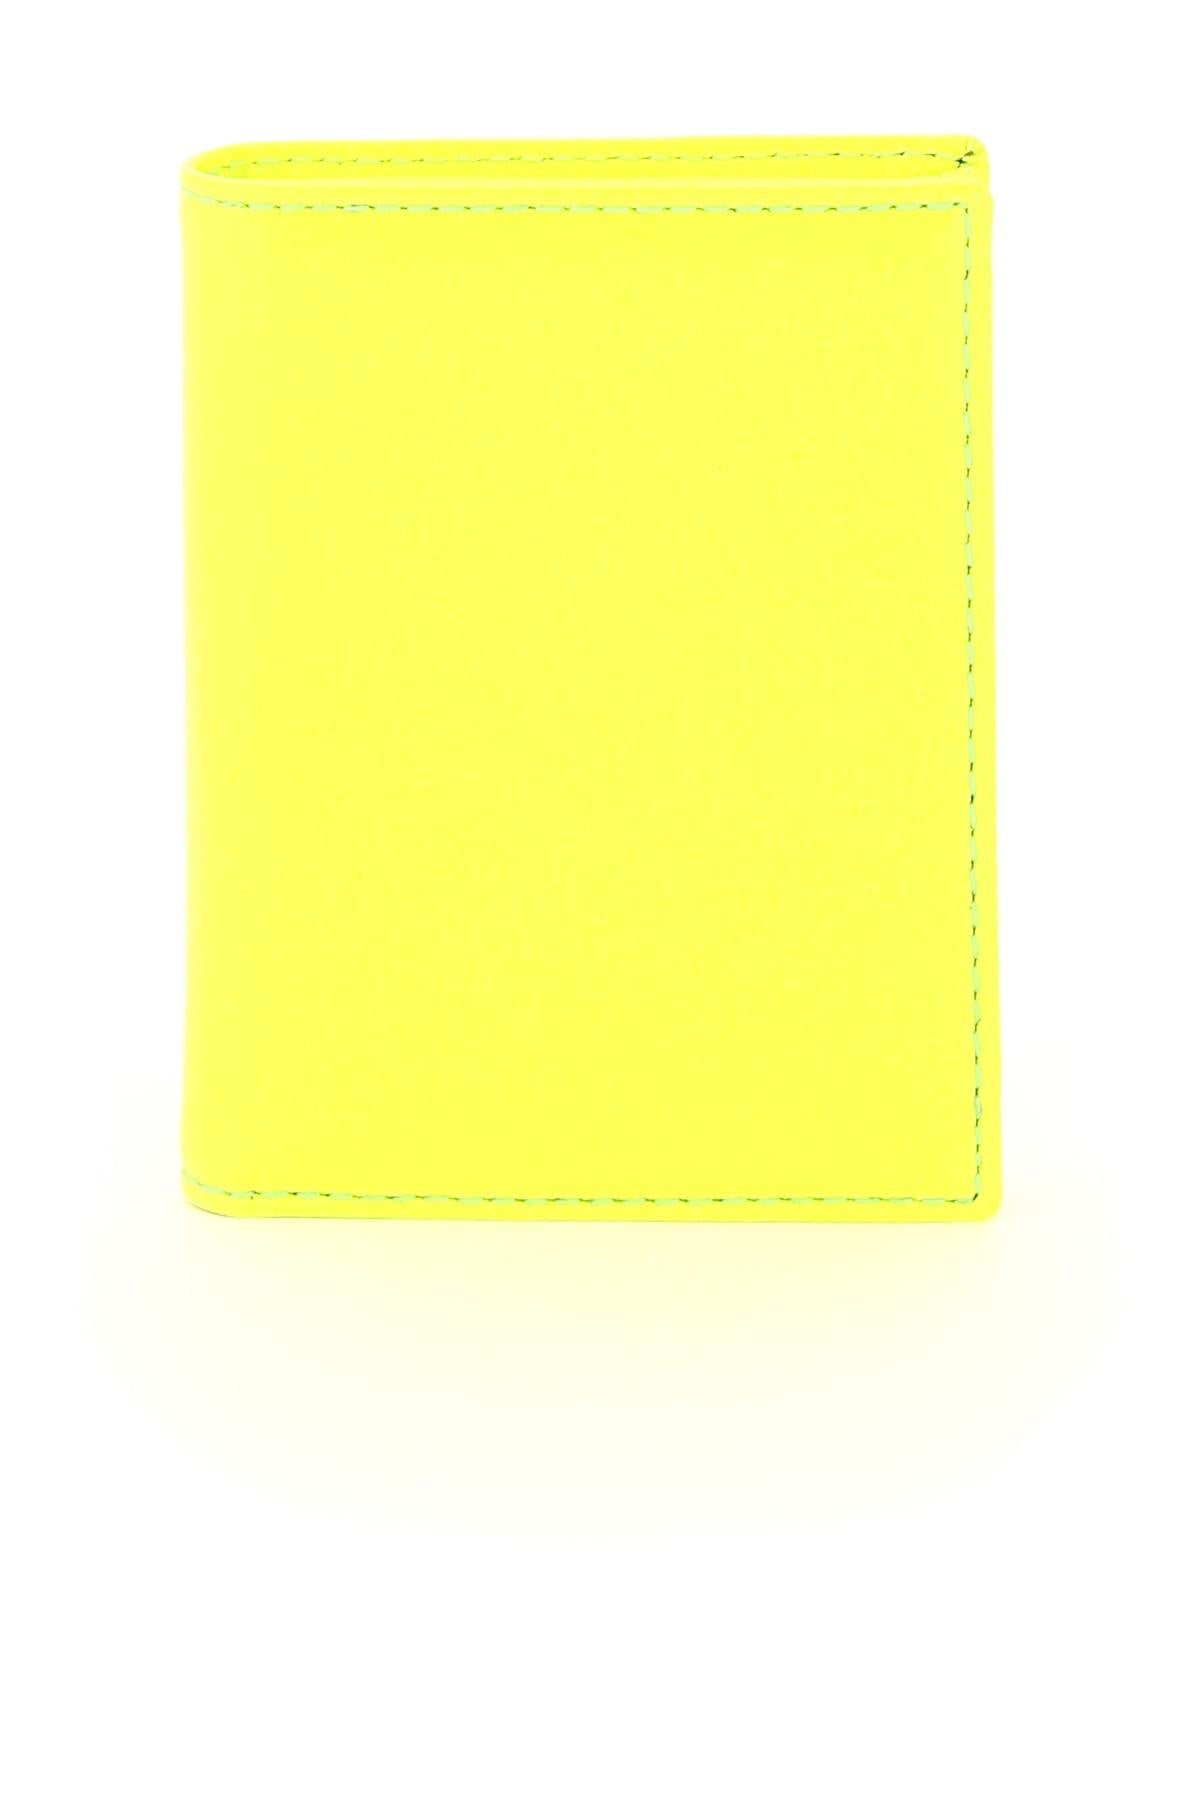 Comme des garcons wallet super fluo small bifold wallet SA0641SF YELLOW LIGHT ORANGE